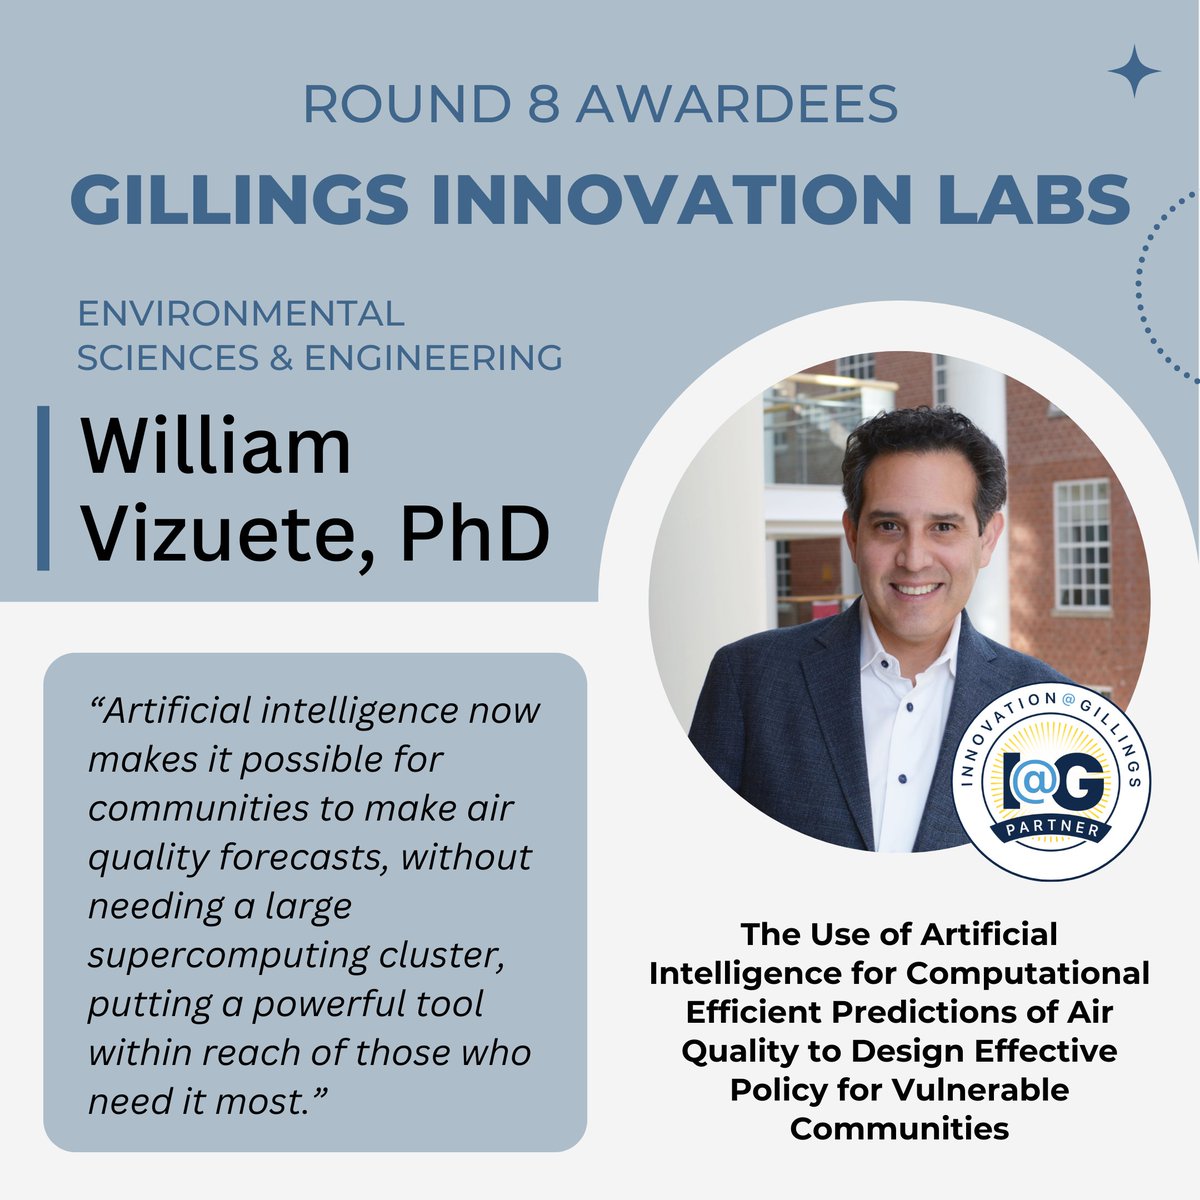 Dr. William Vizuete, Environmental Sciences and Engineering Professor & Round 8 GILs Awardee, revolutionizes air quality forecasts with AI, empowering vulnerable communities. His work on ozone and particulate matter merges science and tech to combat air pollution's impact. 🌍